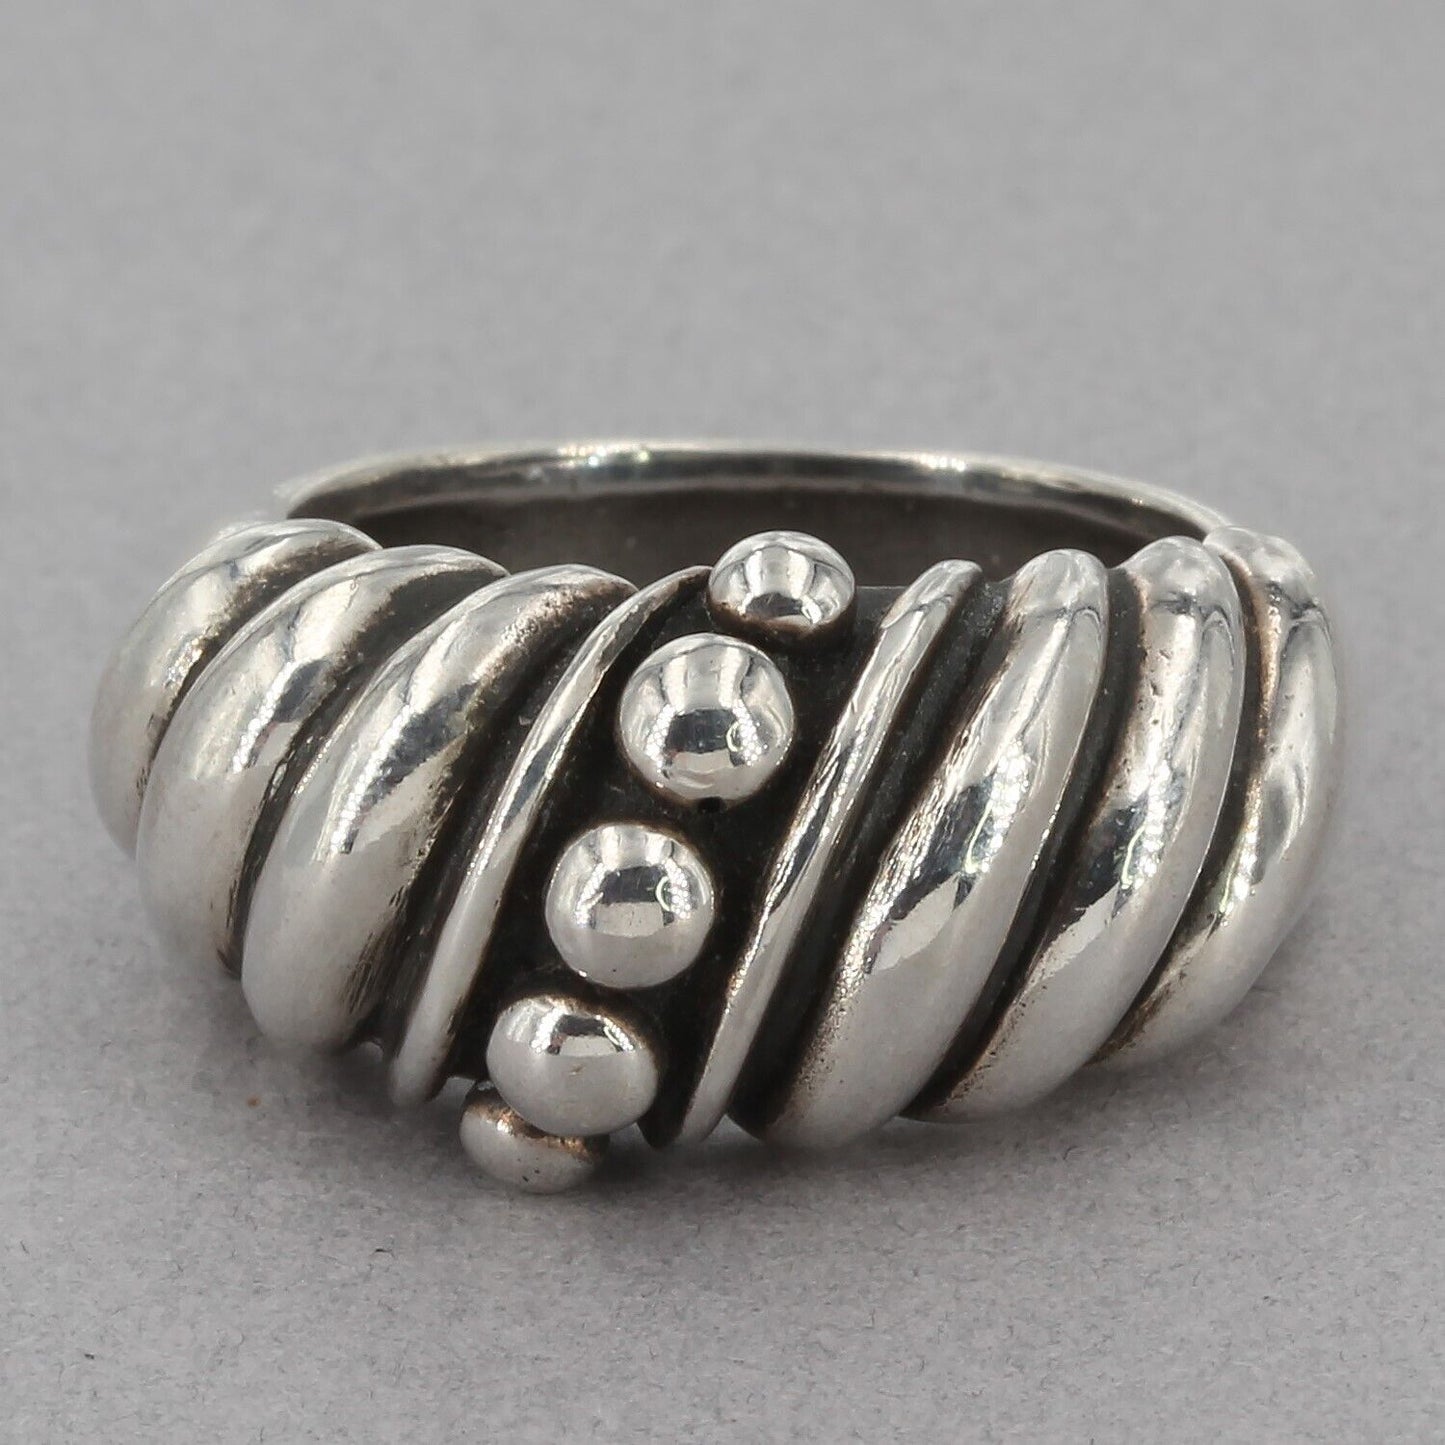 Oxidized Sterling Silver Diagonal Ribbed & Beaded Band Ring Size 7.75